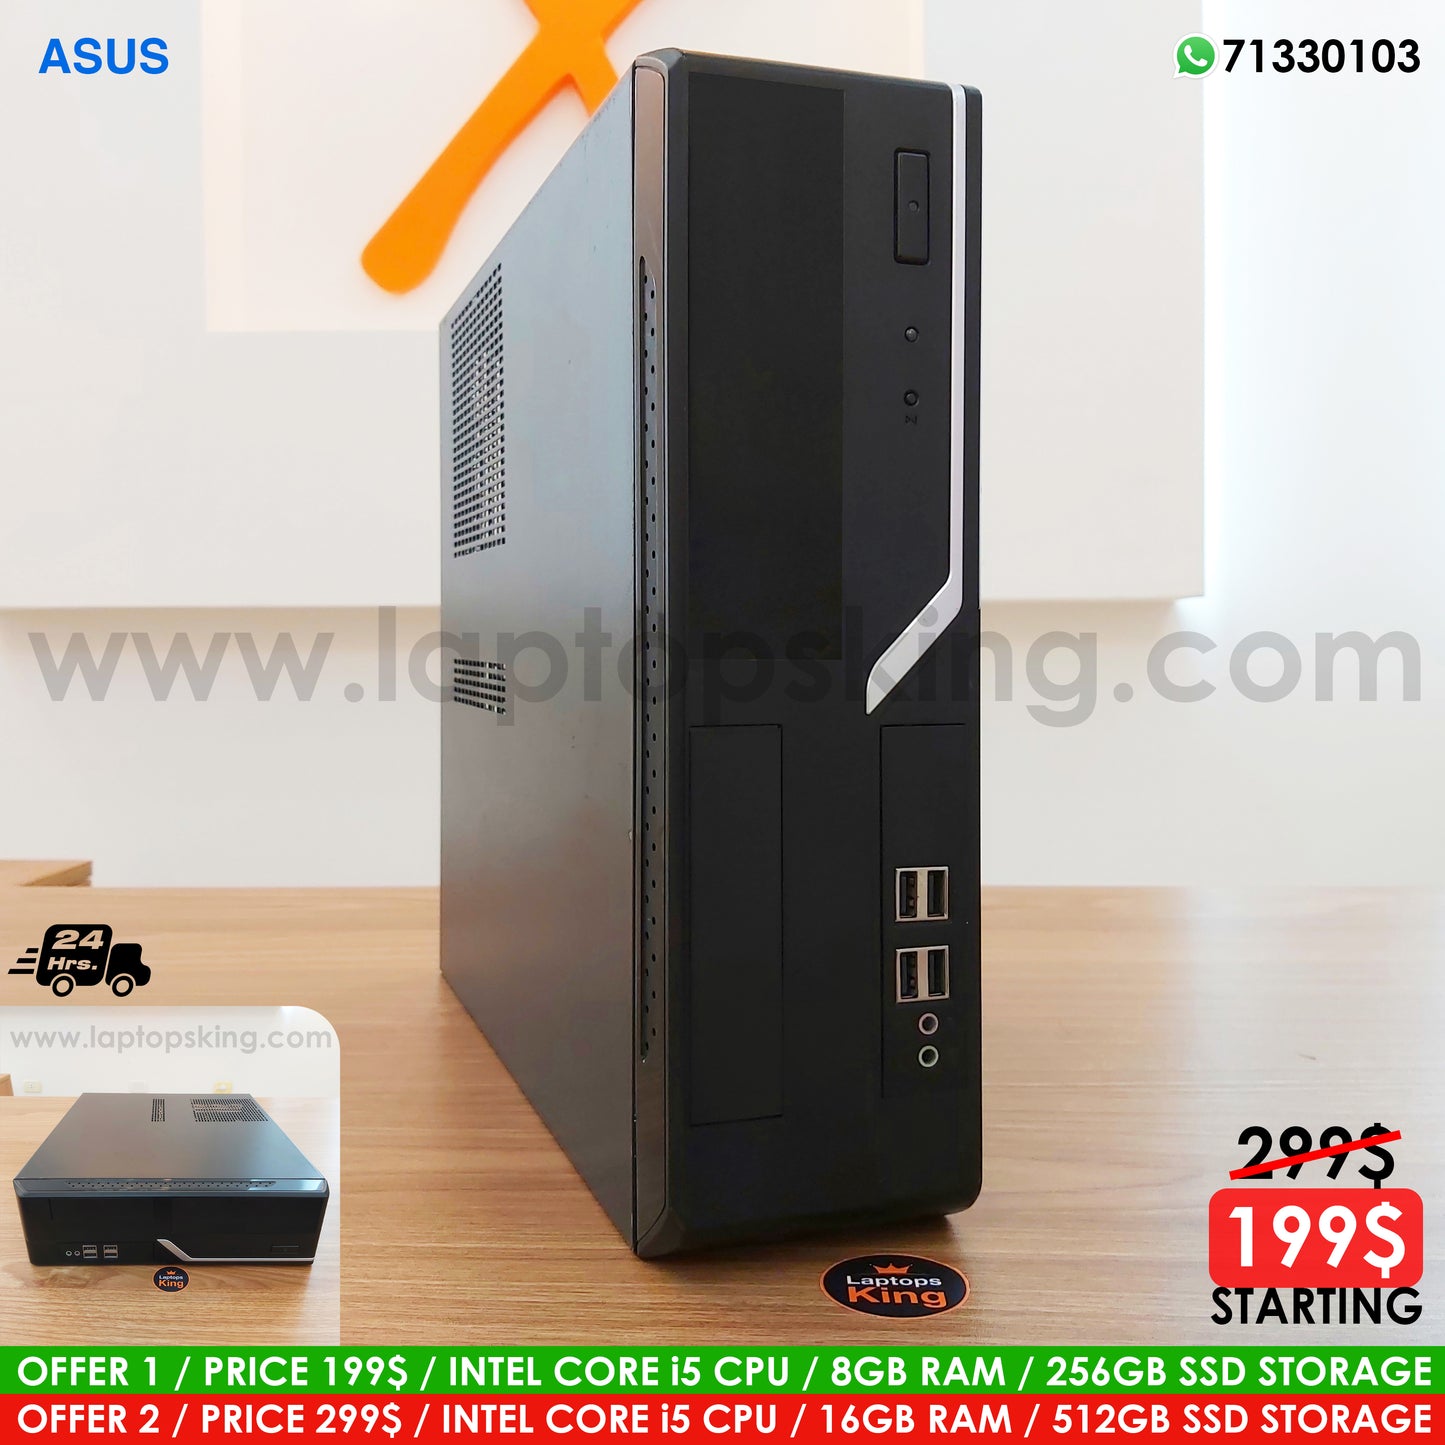 Asus i5 Desktop Computer Case Offers (Used Very Clean)